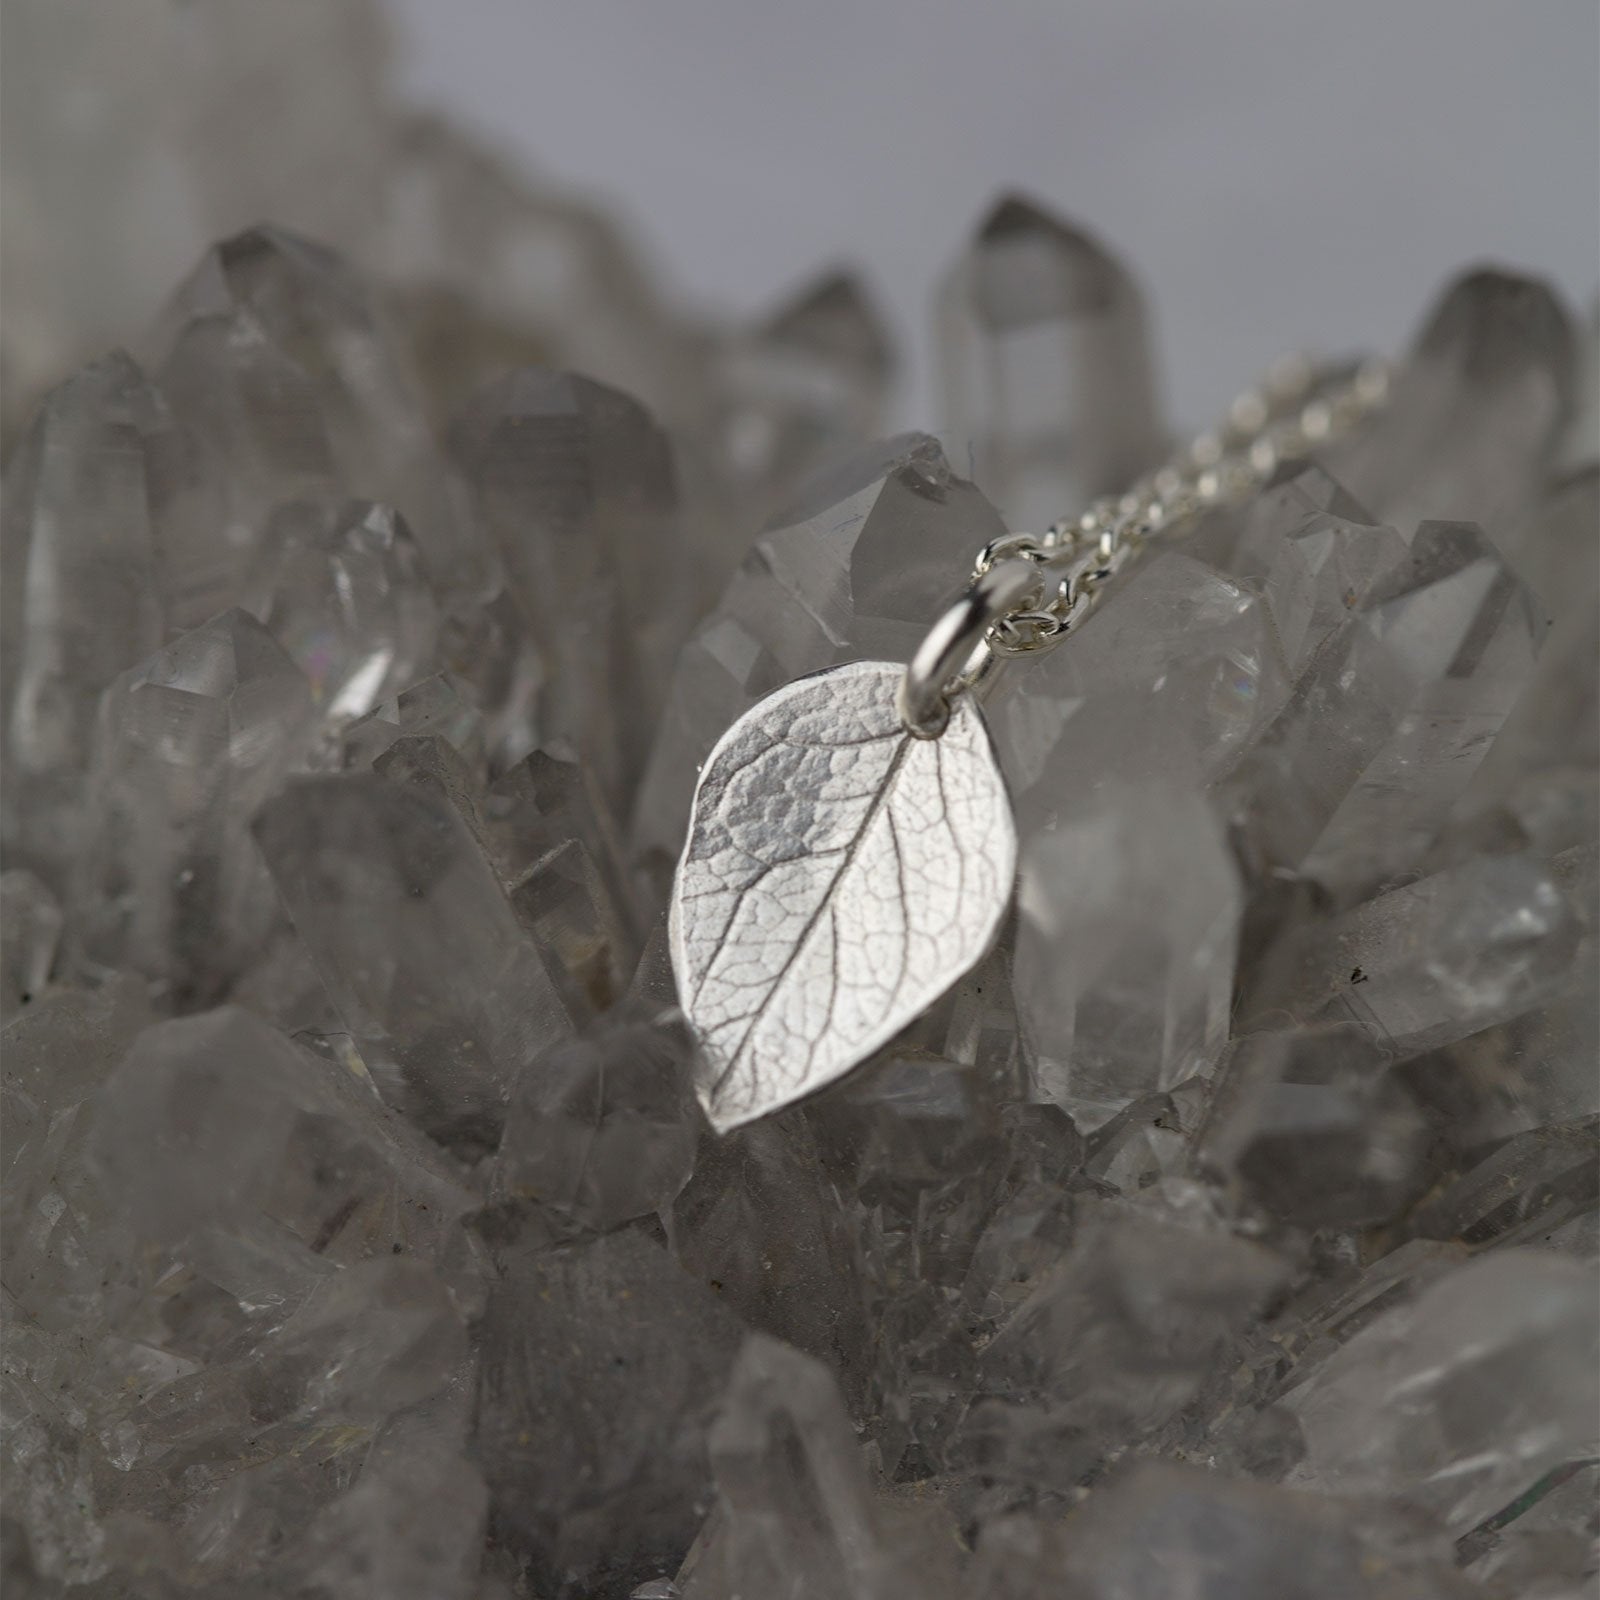 Leaf Flutter Necklace - Handmade Jewelry by Burnish